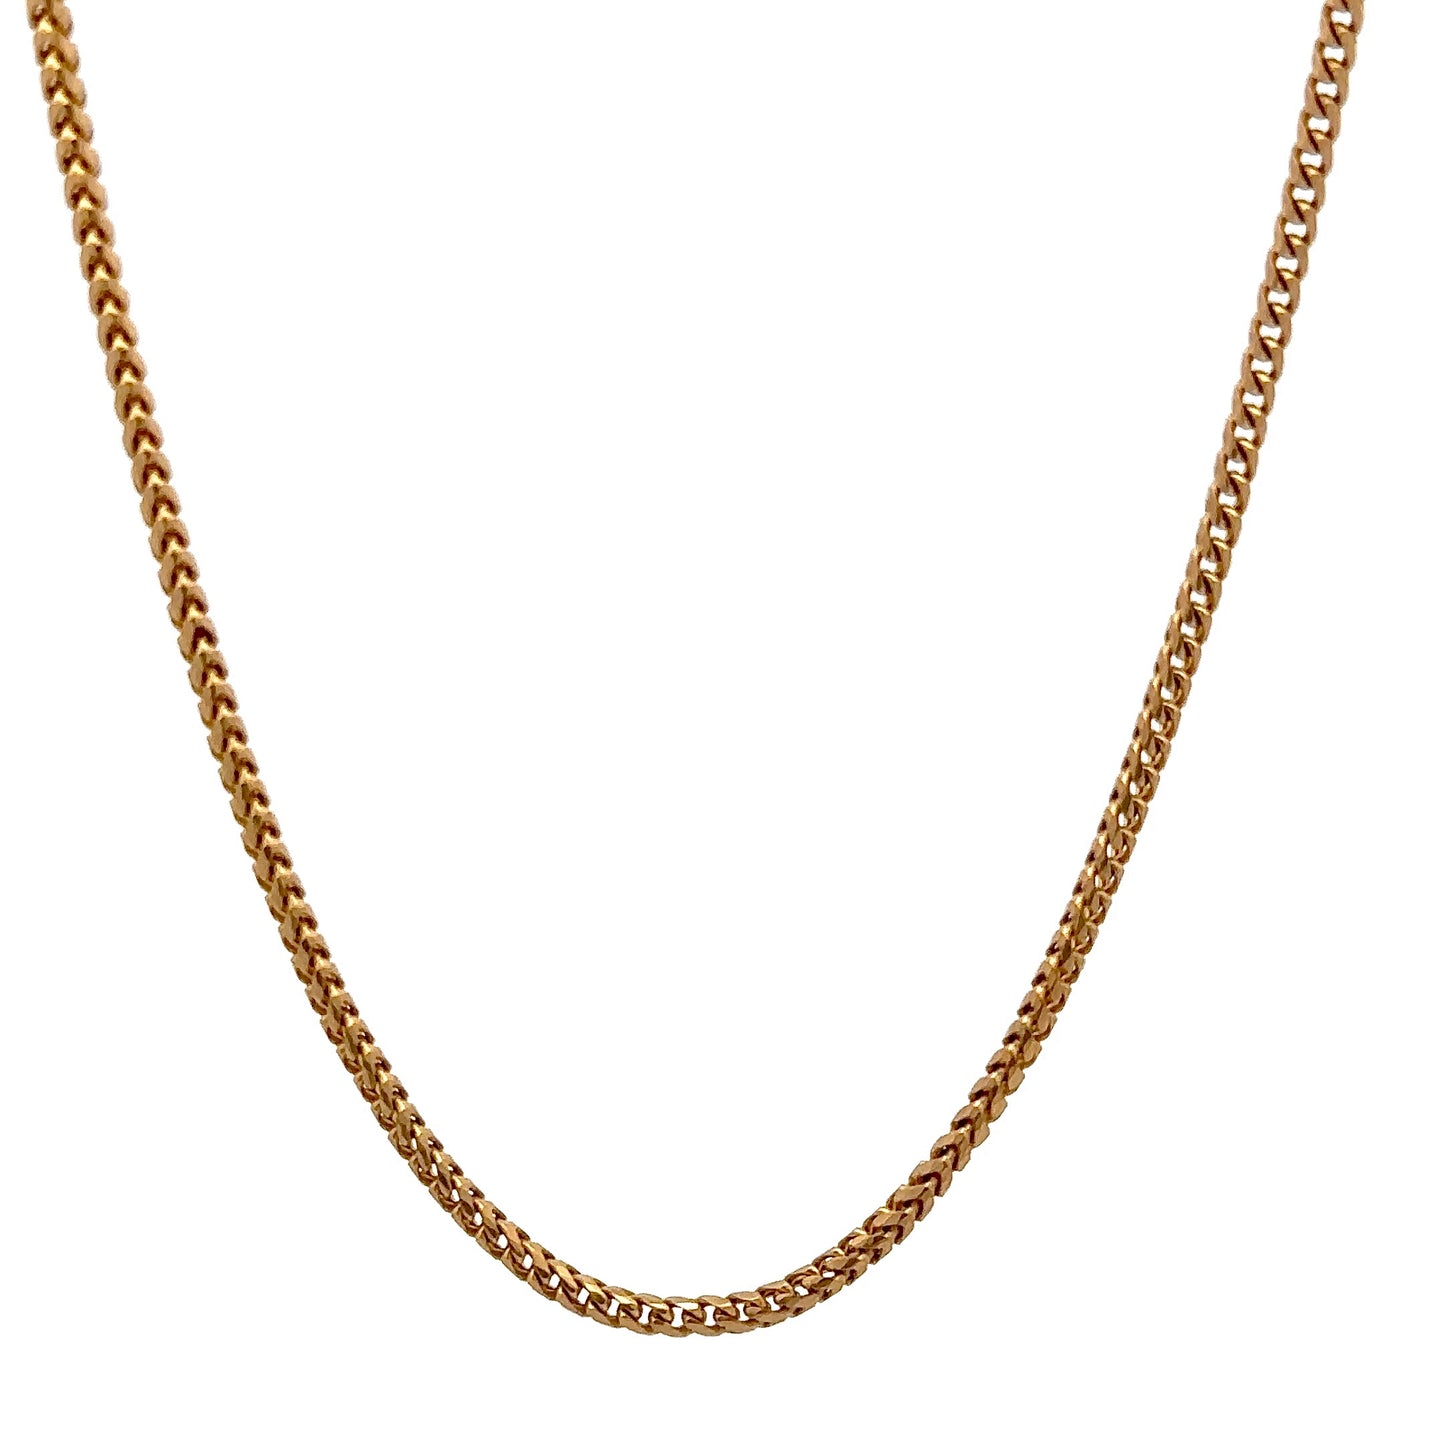 Round style yellow gold franco chain